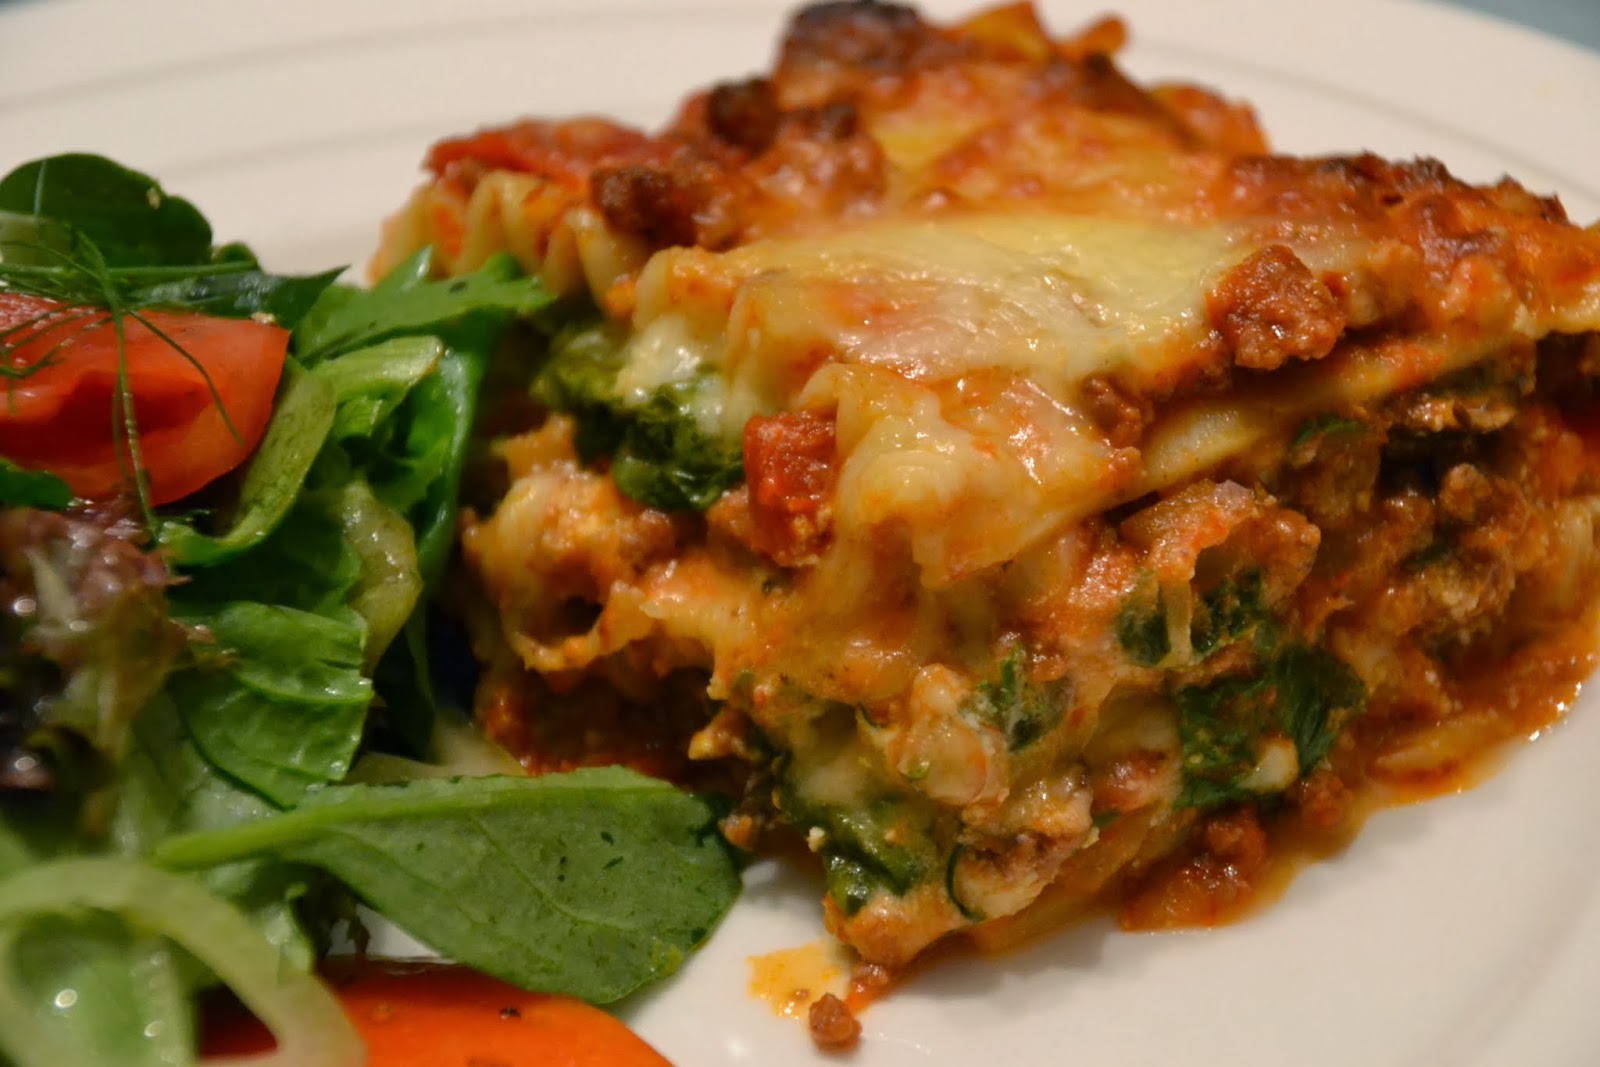 Much Ado About Somethin: The Best Lasagna